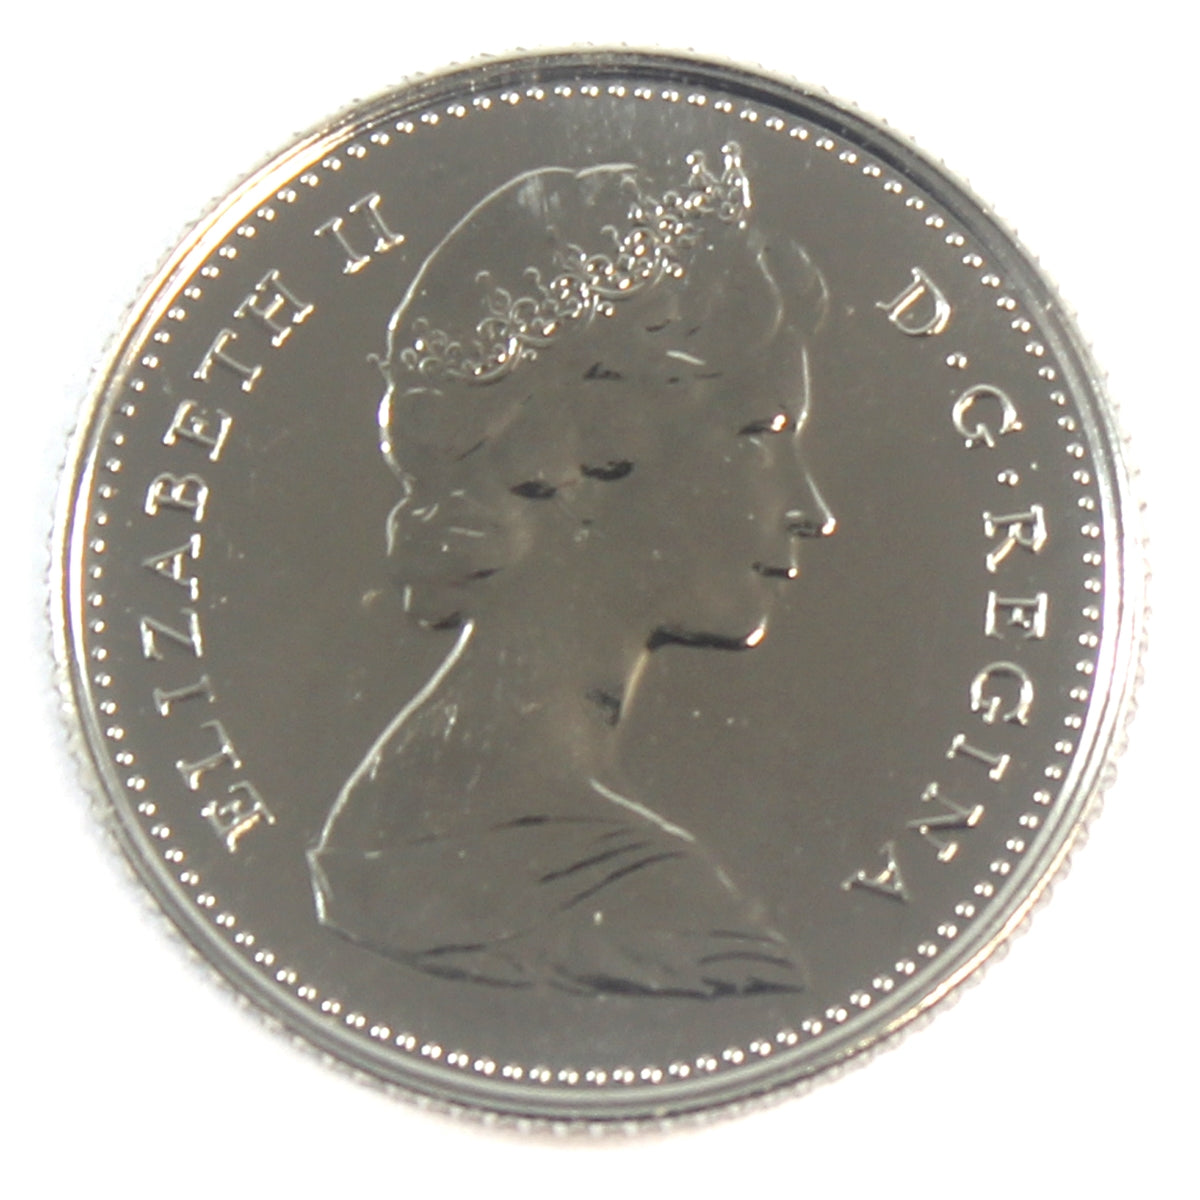 1974 Canada 10-cent Proof Like